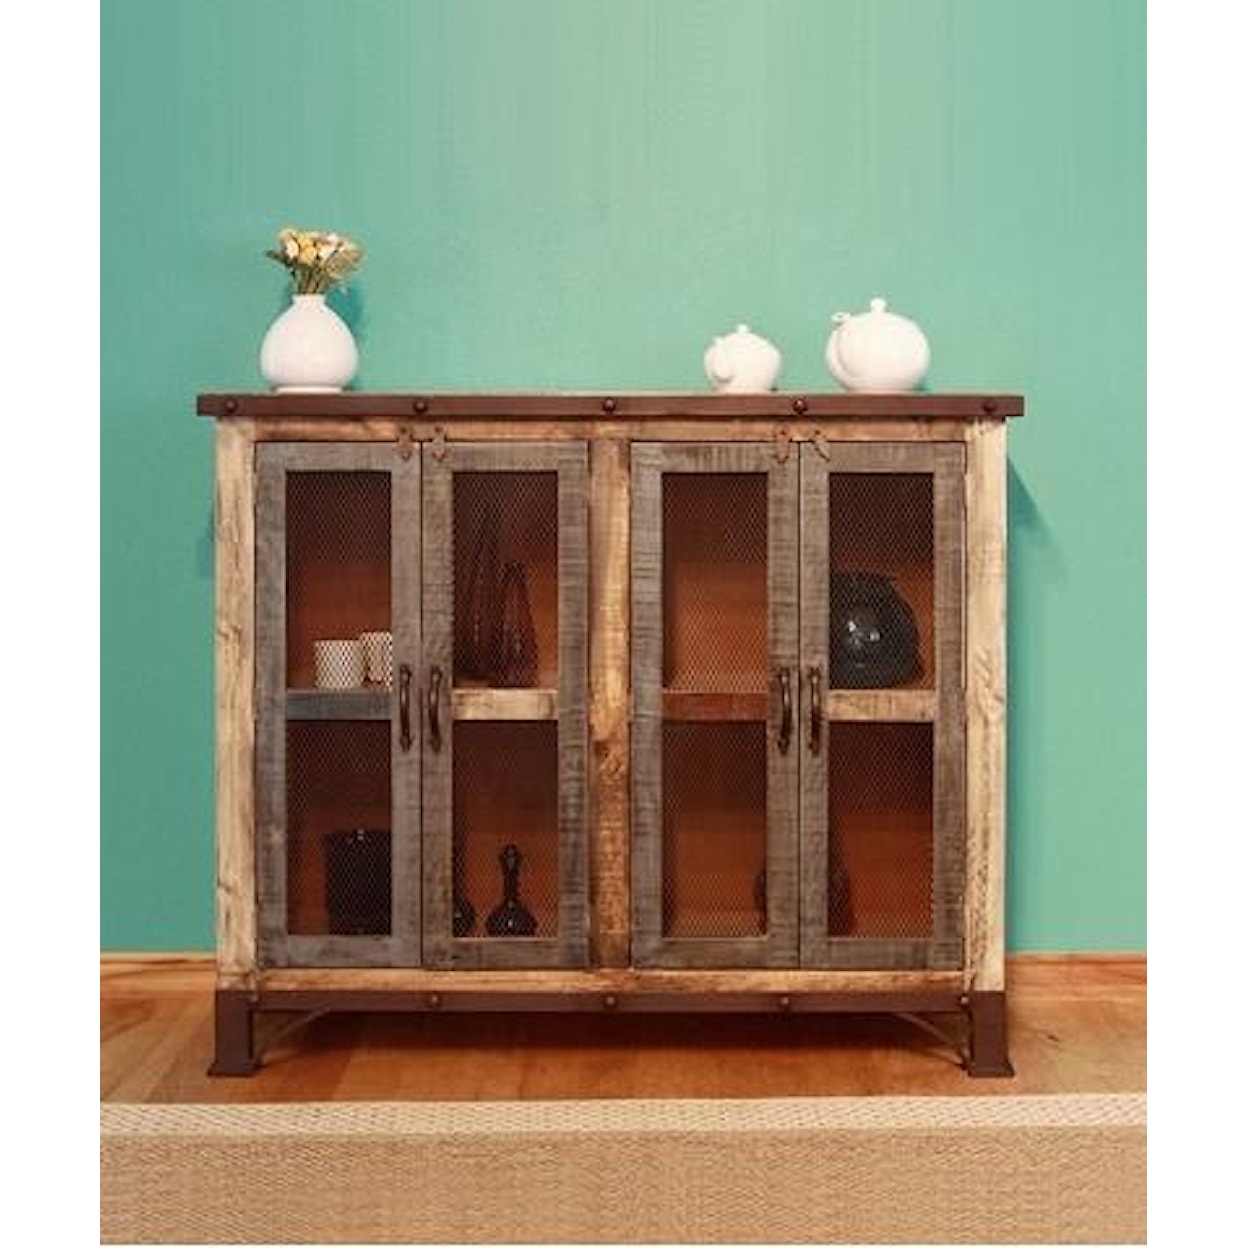 IFD International Furniture Direct 900 Antique Multicolor Console with 4 Iron Mesh Doors